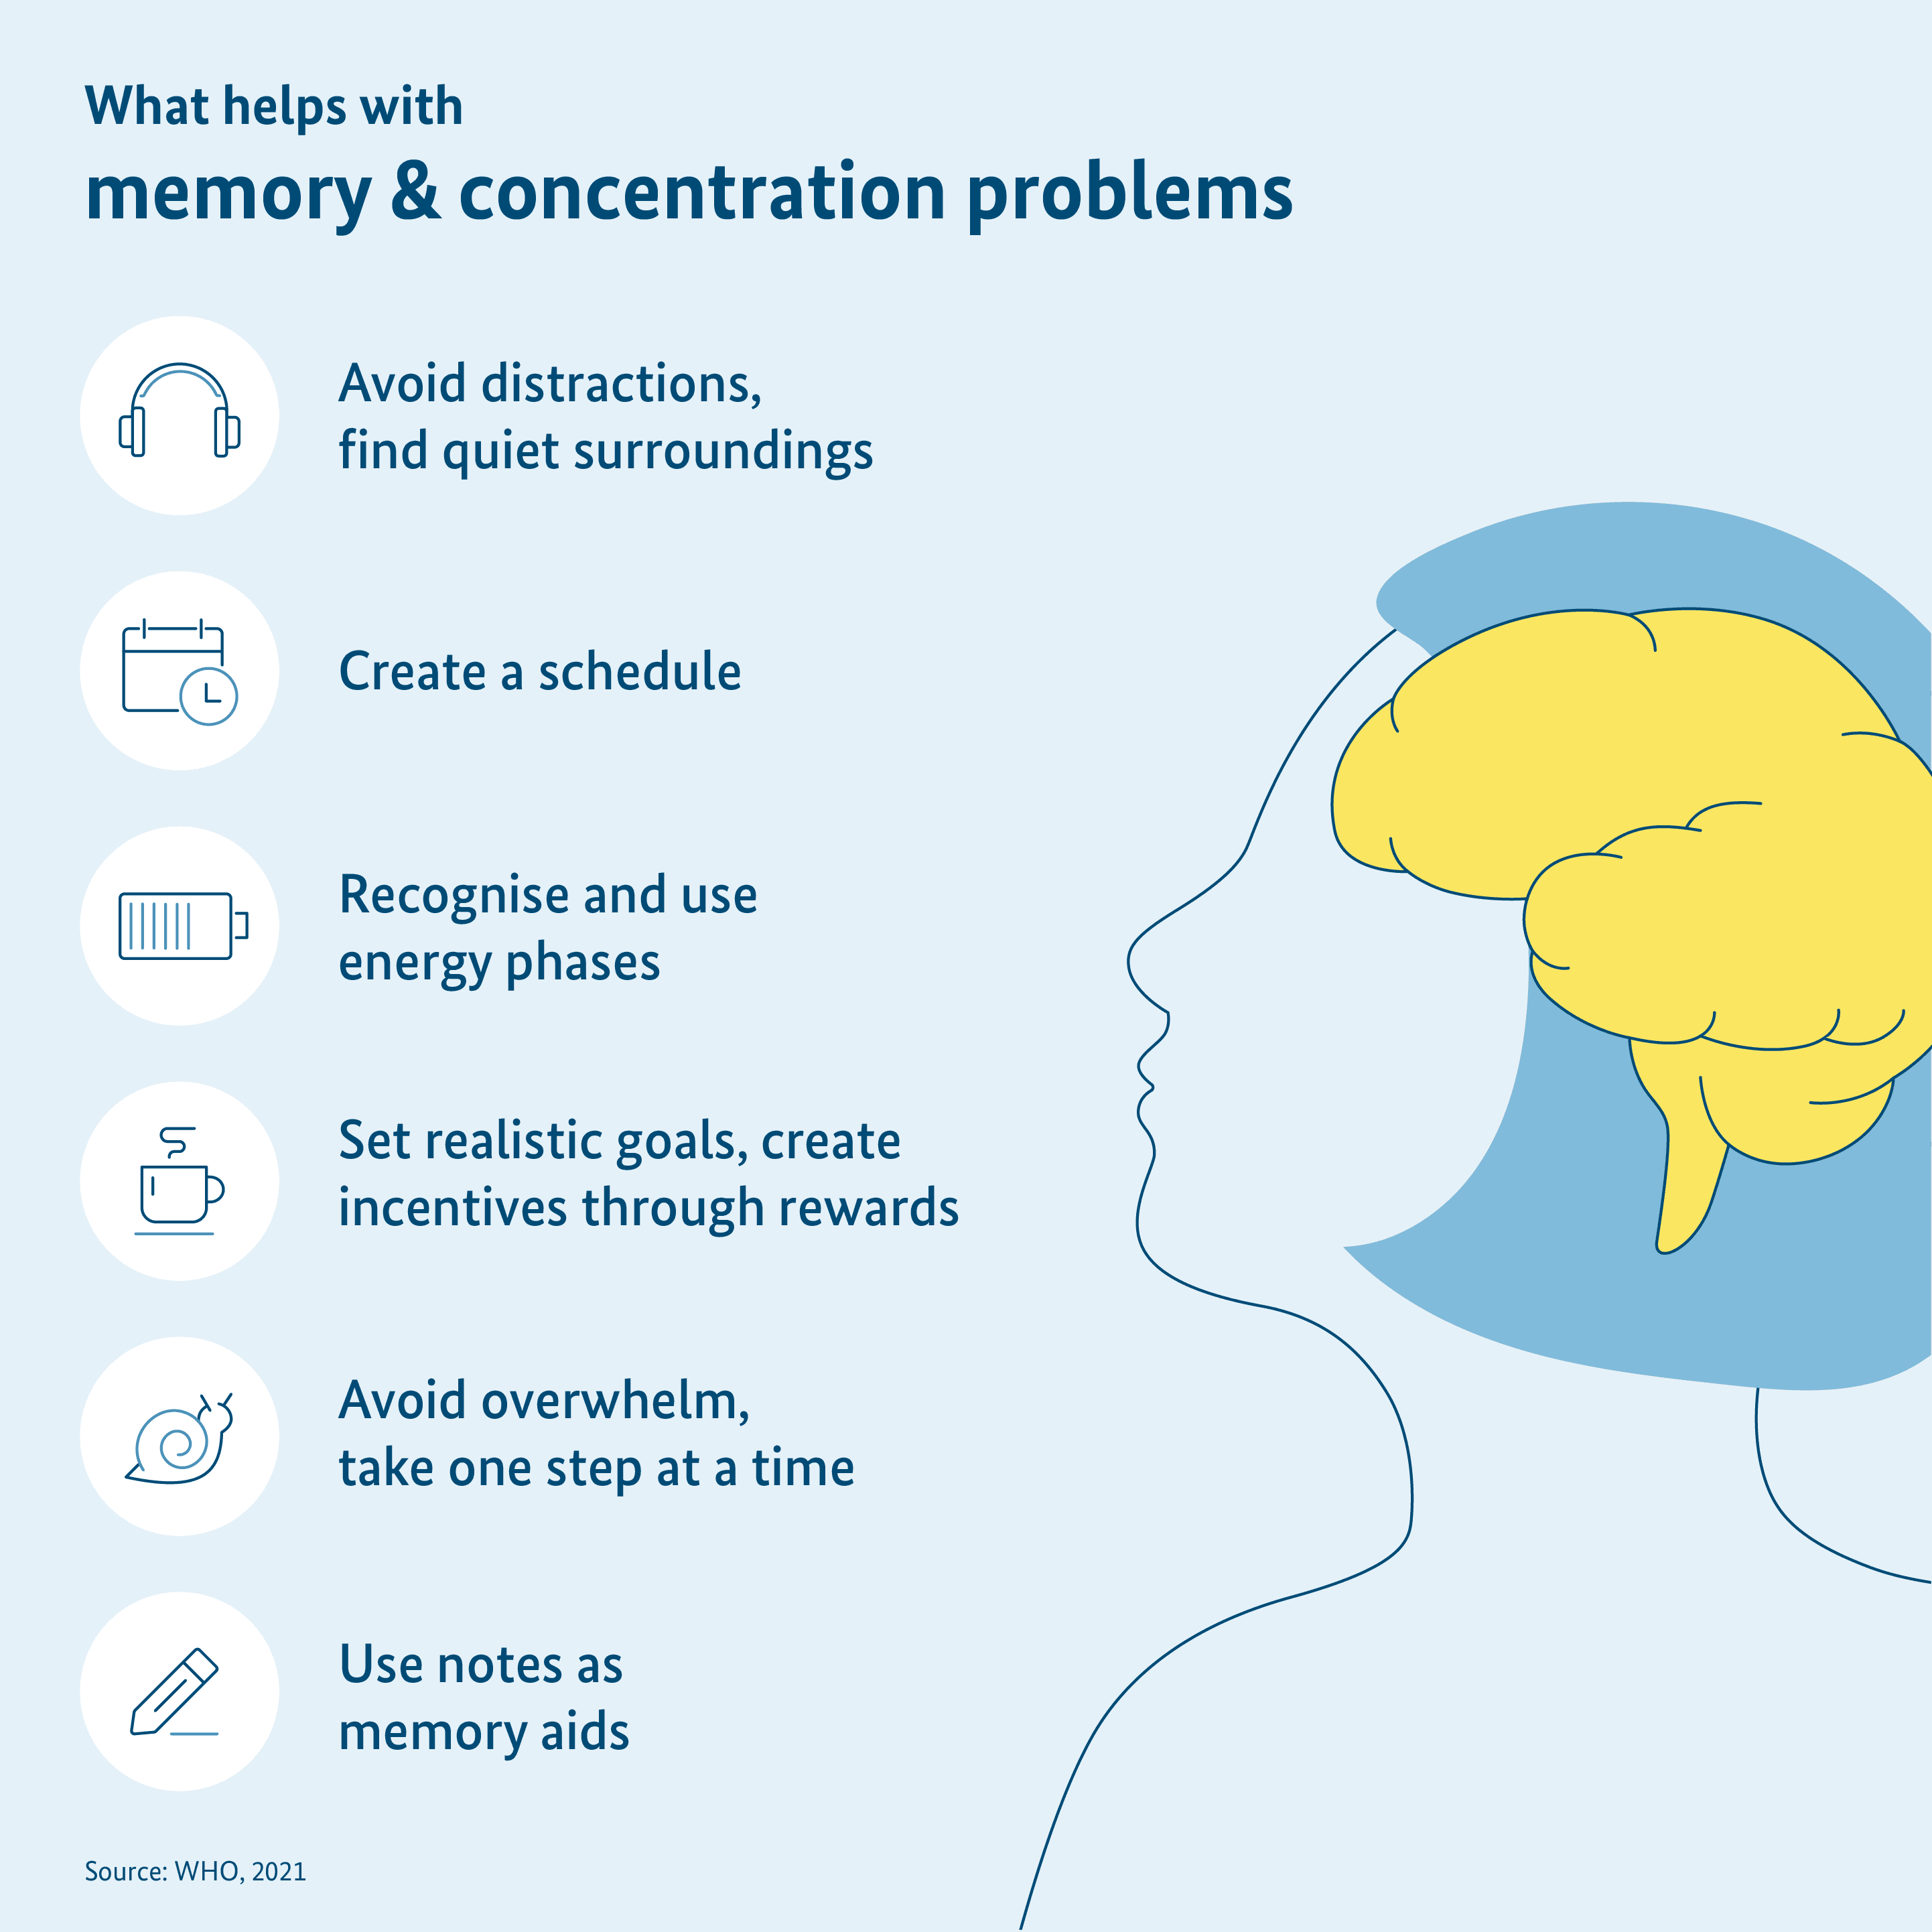 Graphic: Dealing with memory and concentration problems, you can see an illustration of the brain in the human body as well as tips